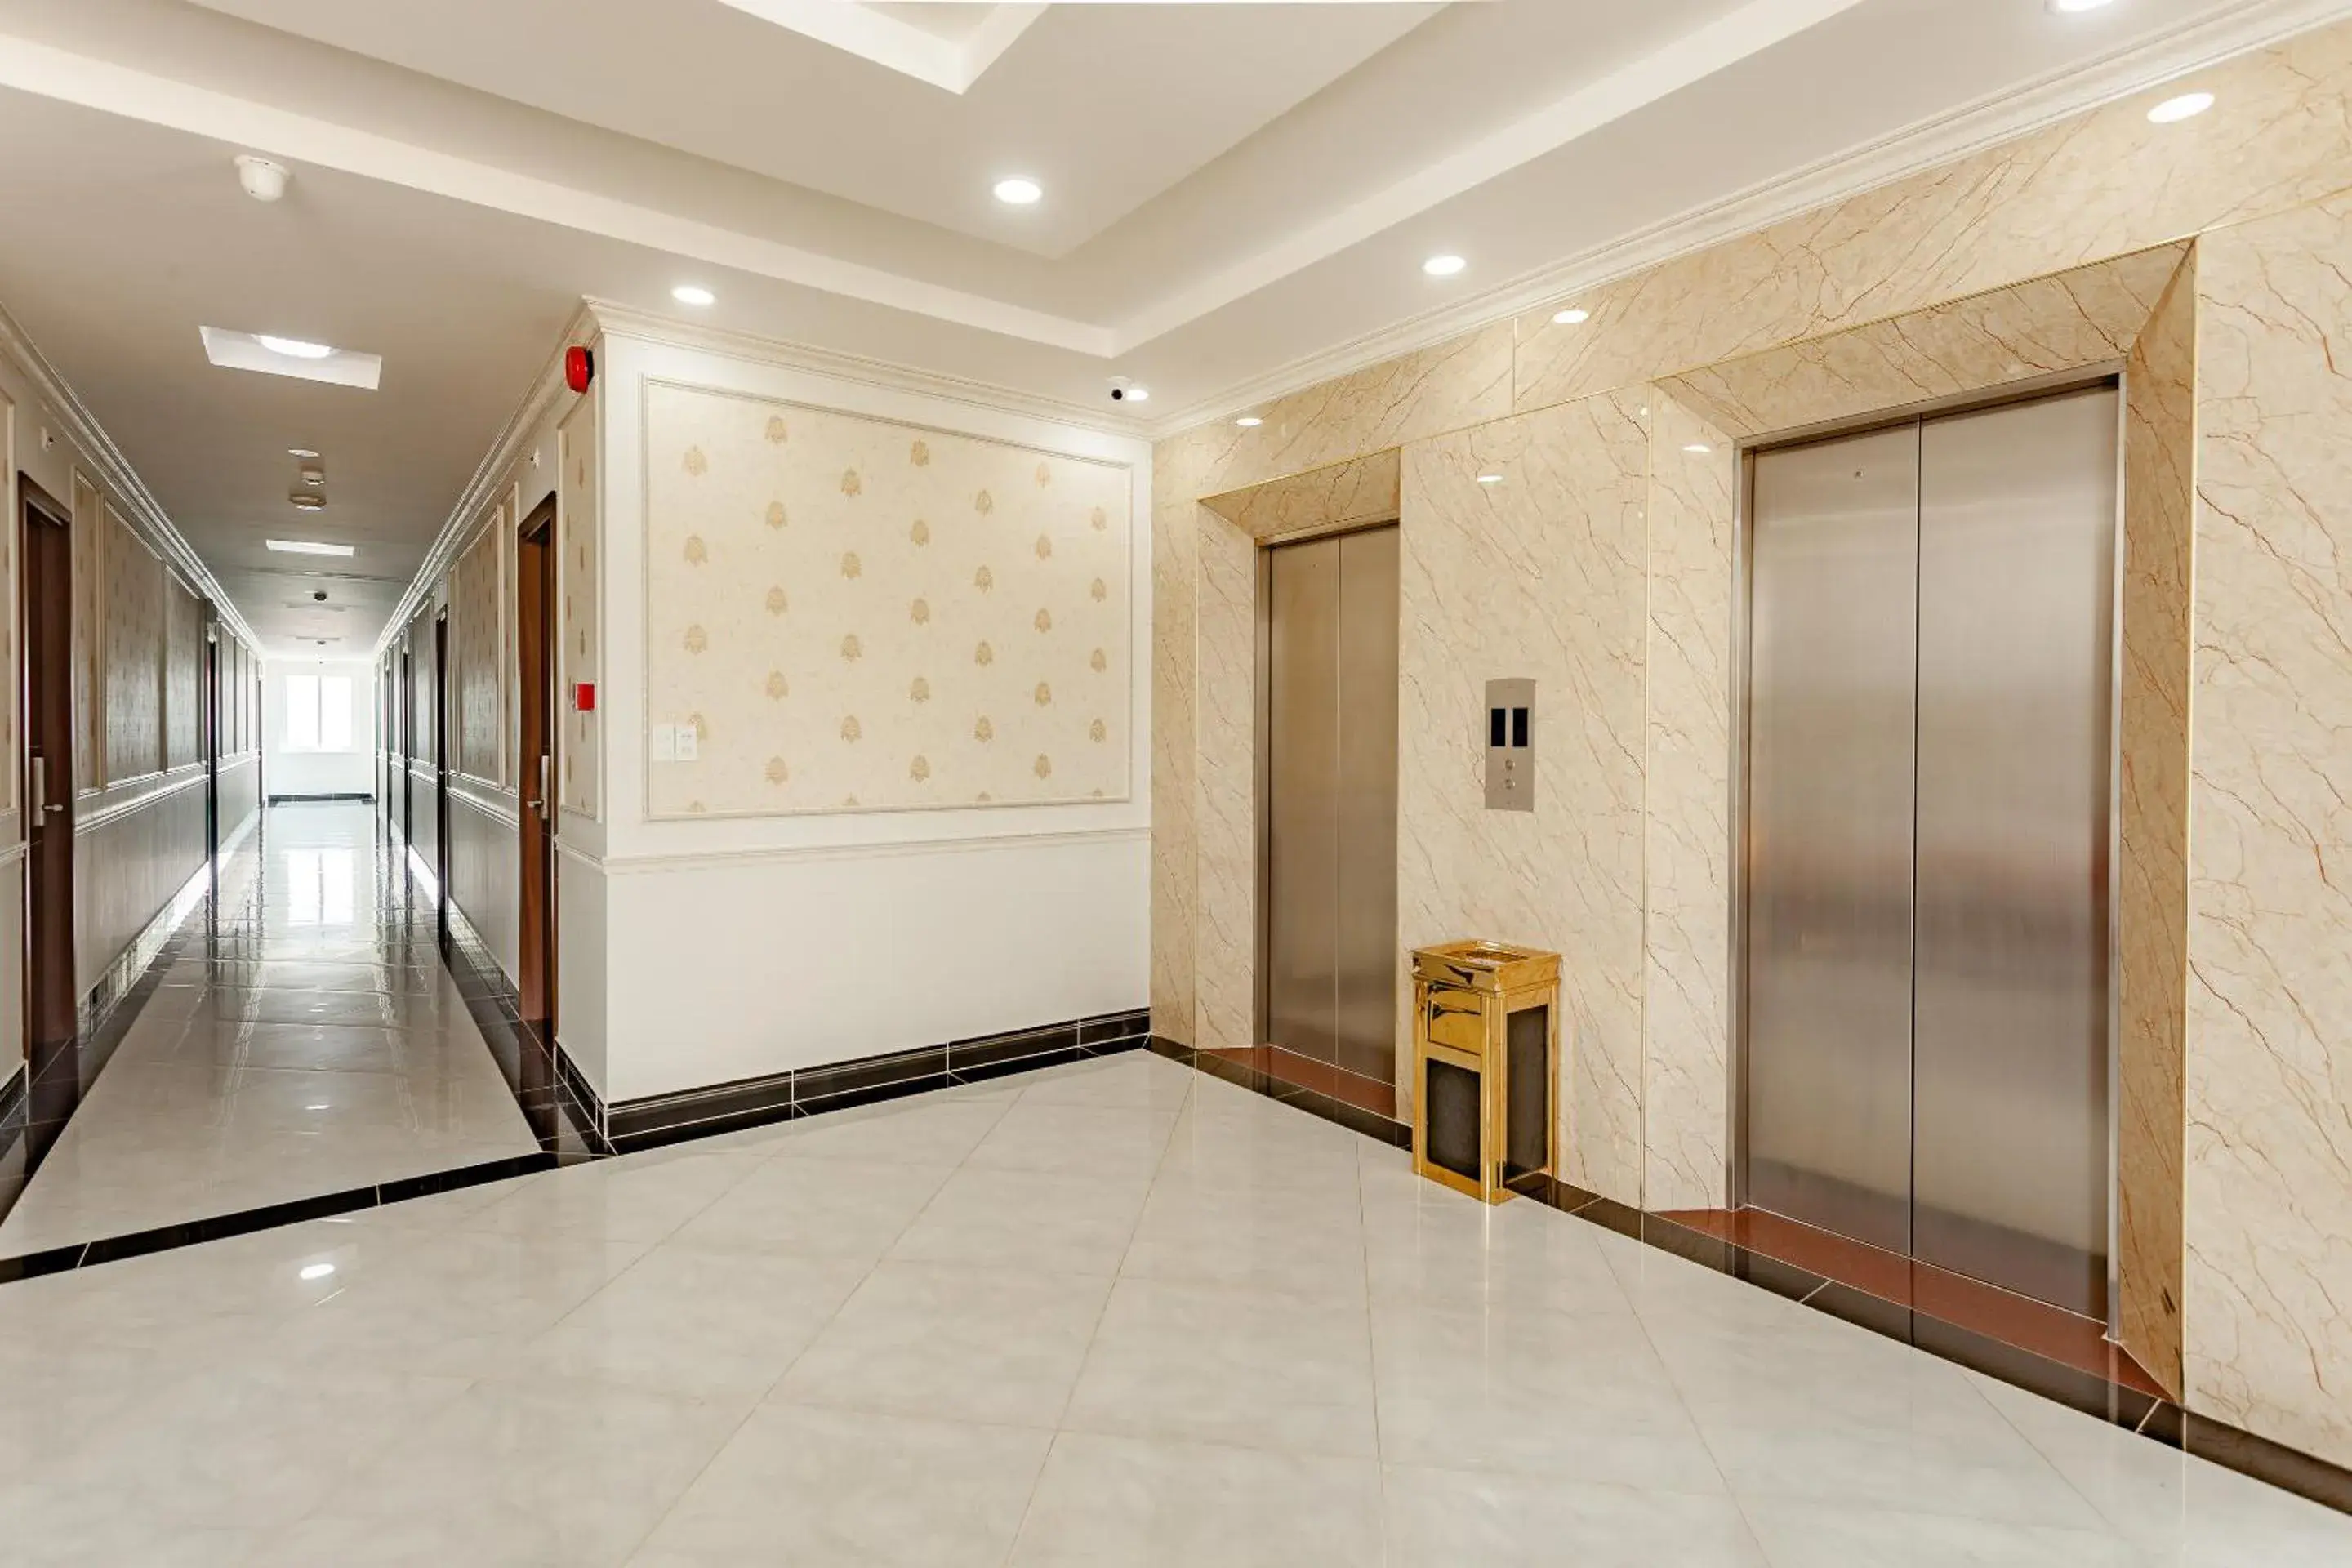 Floor plan in Phung Hung Boutique Hotel